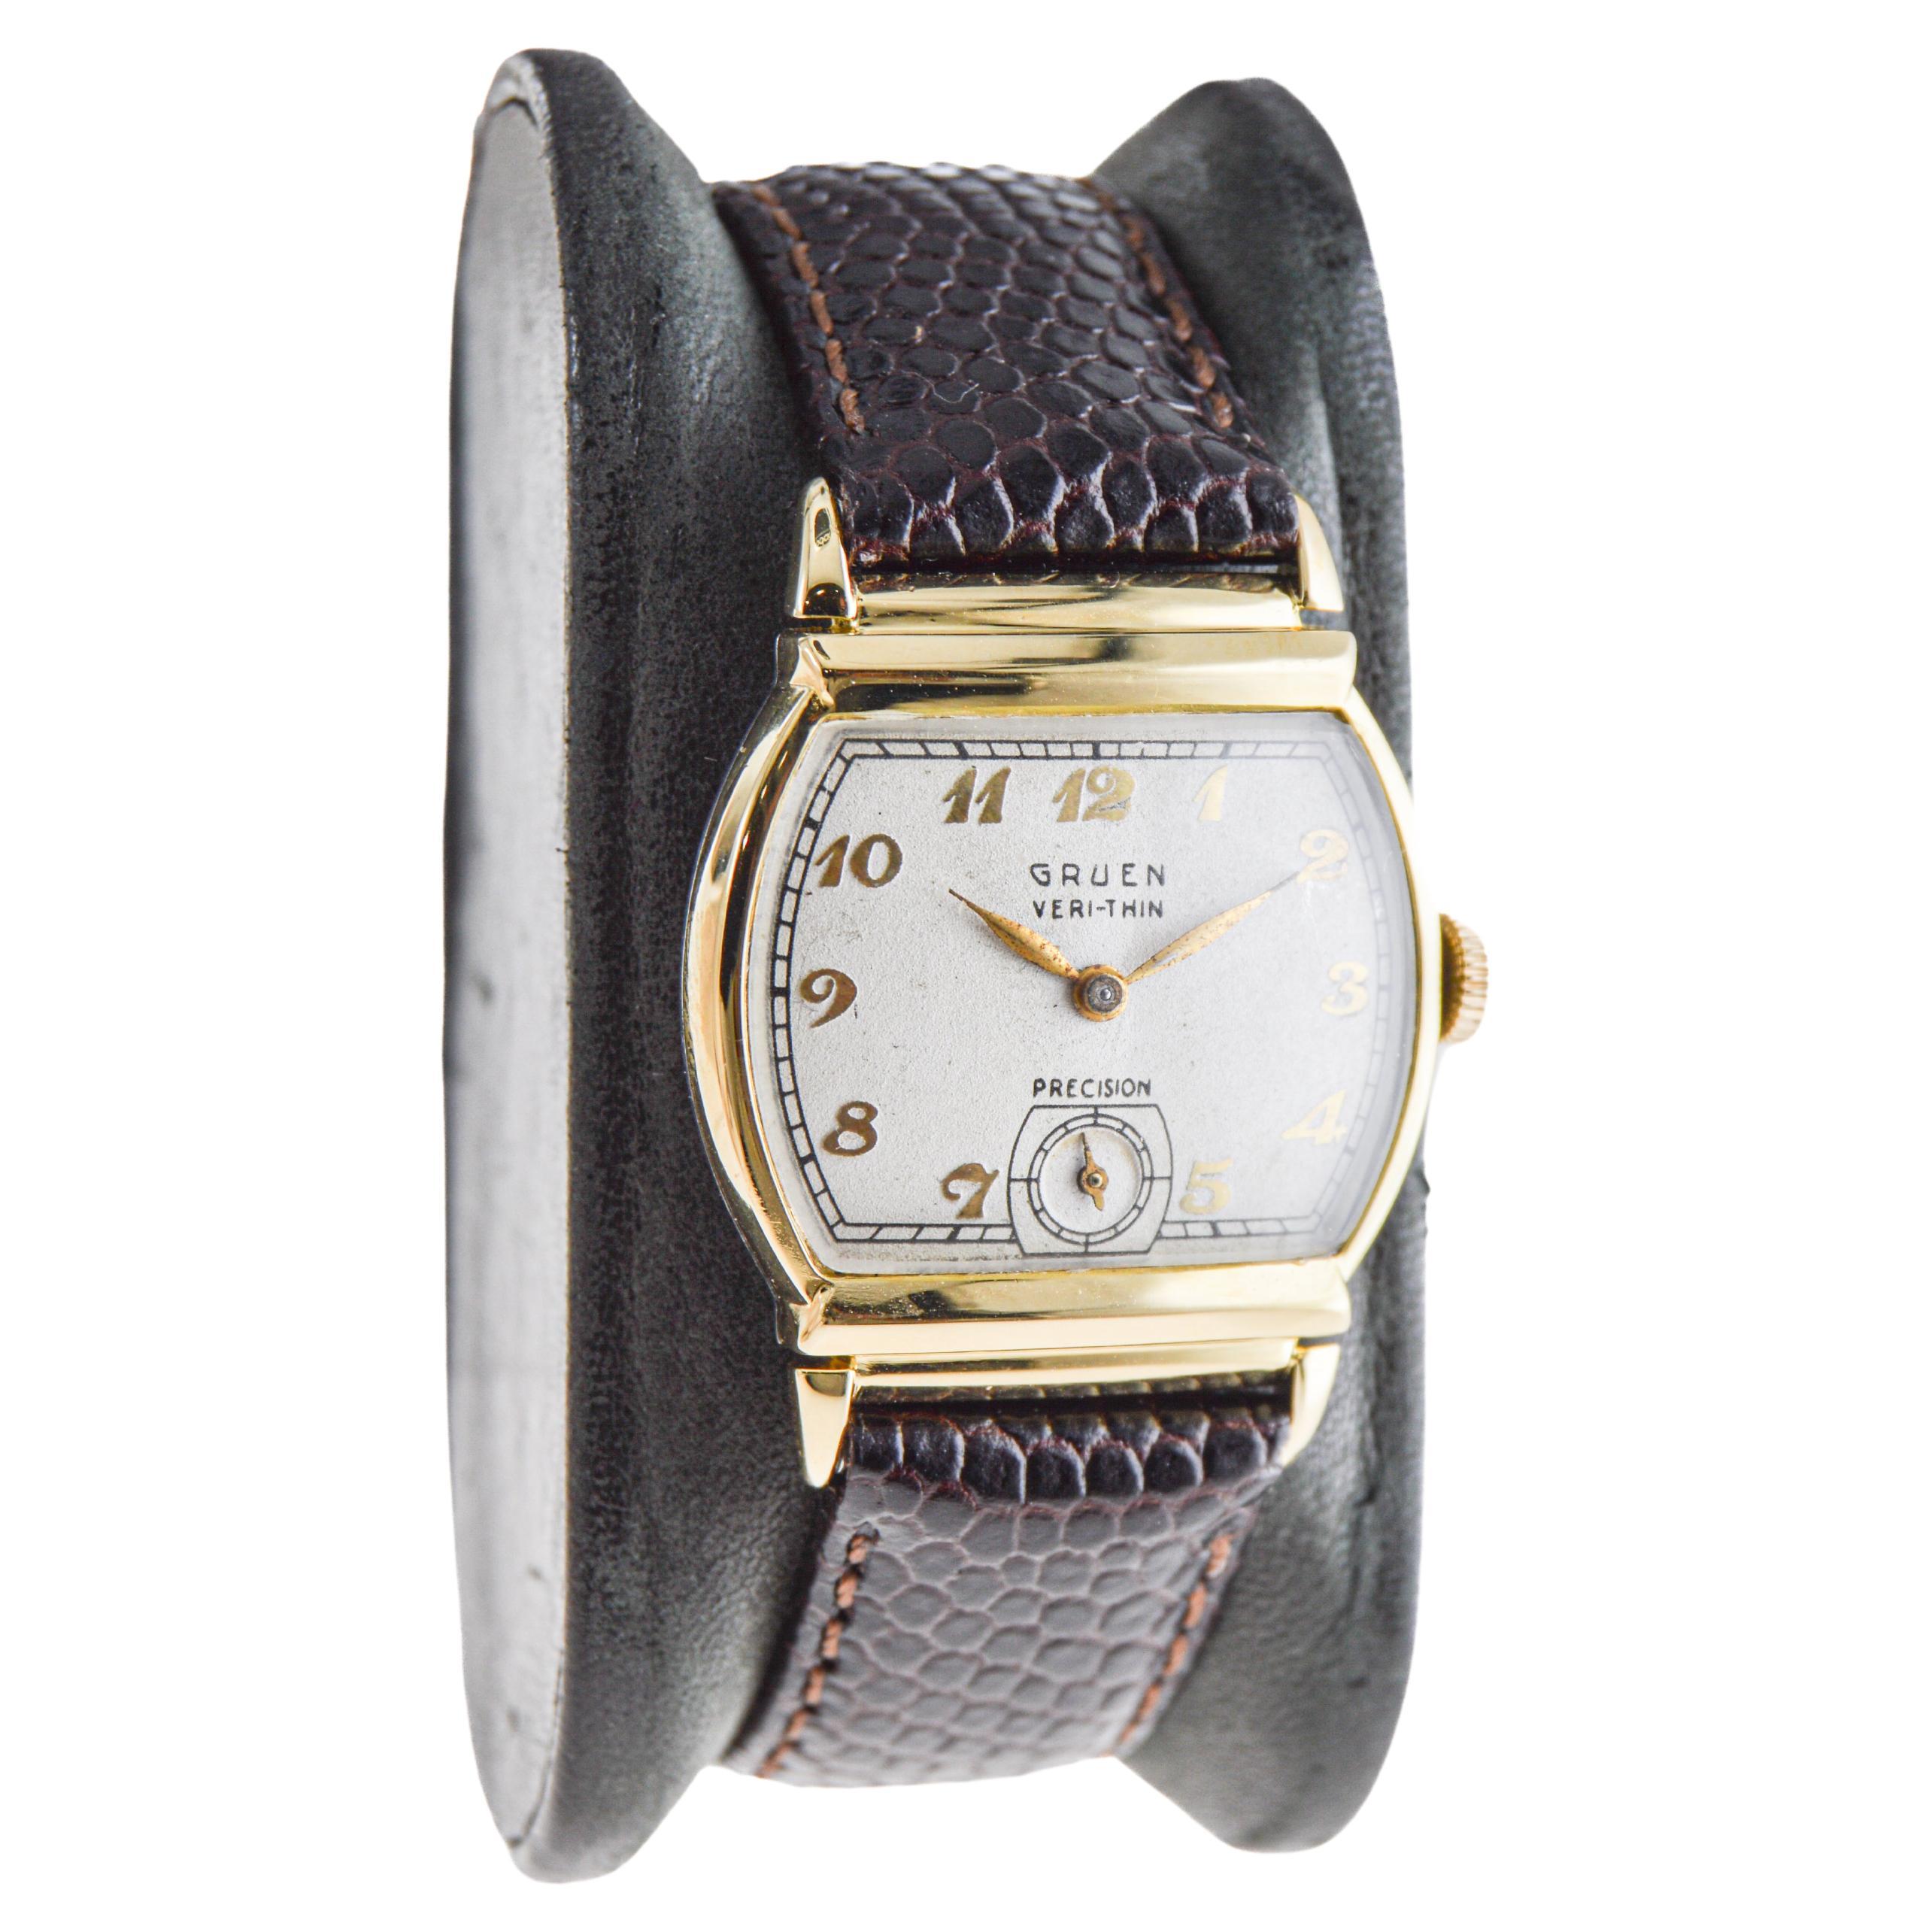 FACTORY / HOUSE: Gruen Watch Company
STYLE / REFERENCE: Art Deco / Reference 421
METAL / MATERIAL: Yellow Gold-Filled
CIRCA / YEAR: 1940's
DIMENSIONS / SIZE: Length 36mm X Width 27mm
MOVEMENT / CALIBER: Manual Winding / 15 Jewels / Caliber 527
DIAL